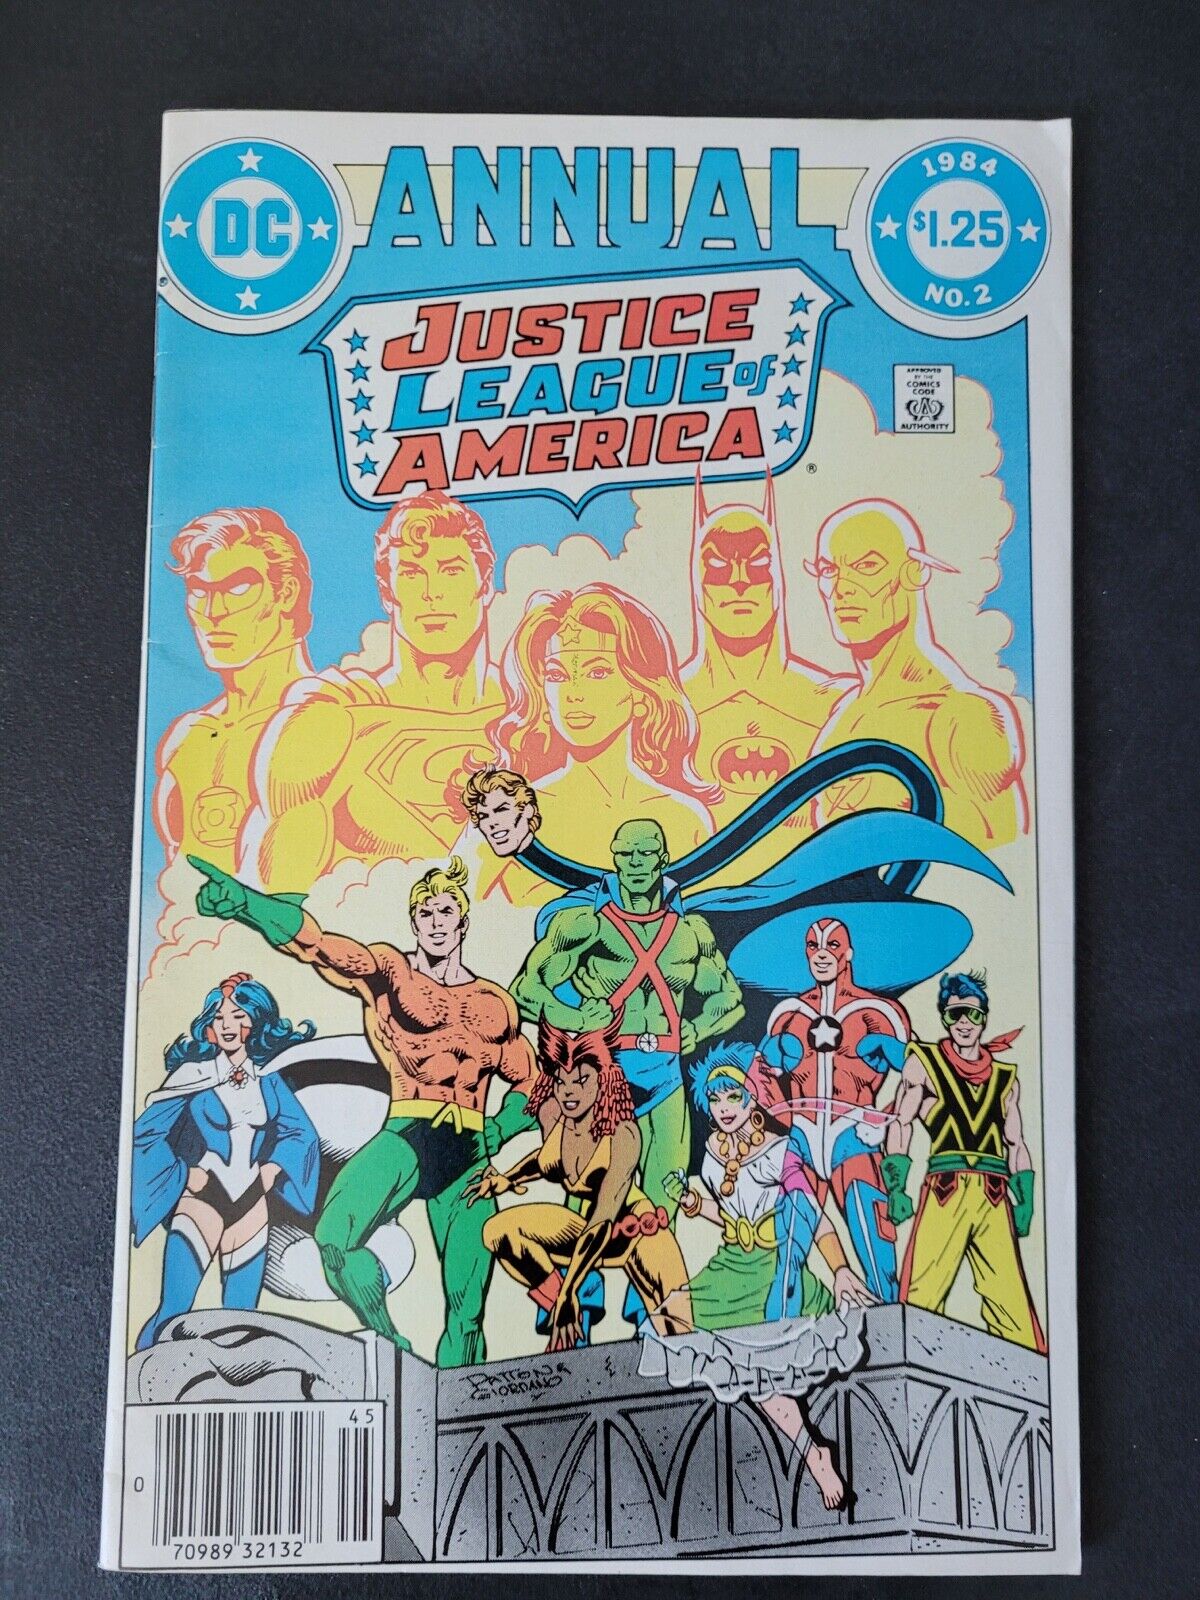 JUSTICE LEAGUE OF AMERICA ANNUAL #2 (1984) 1ST APPEARANCE OF VIBE GYPSY STEEL